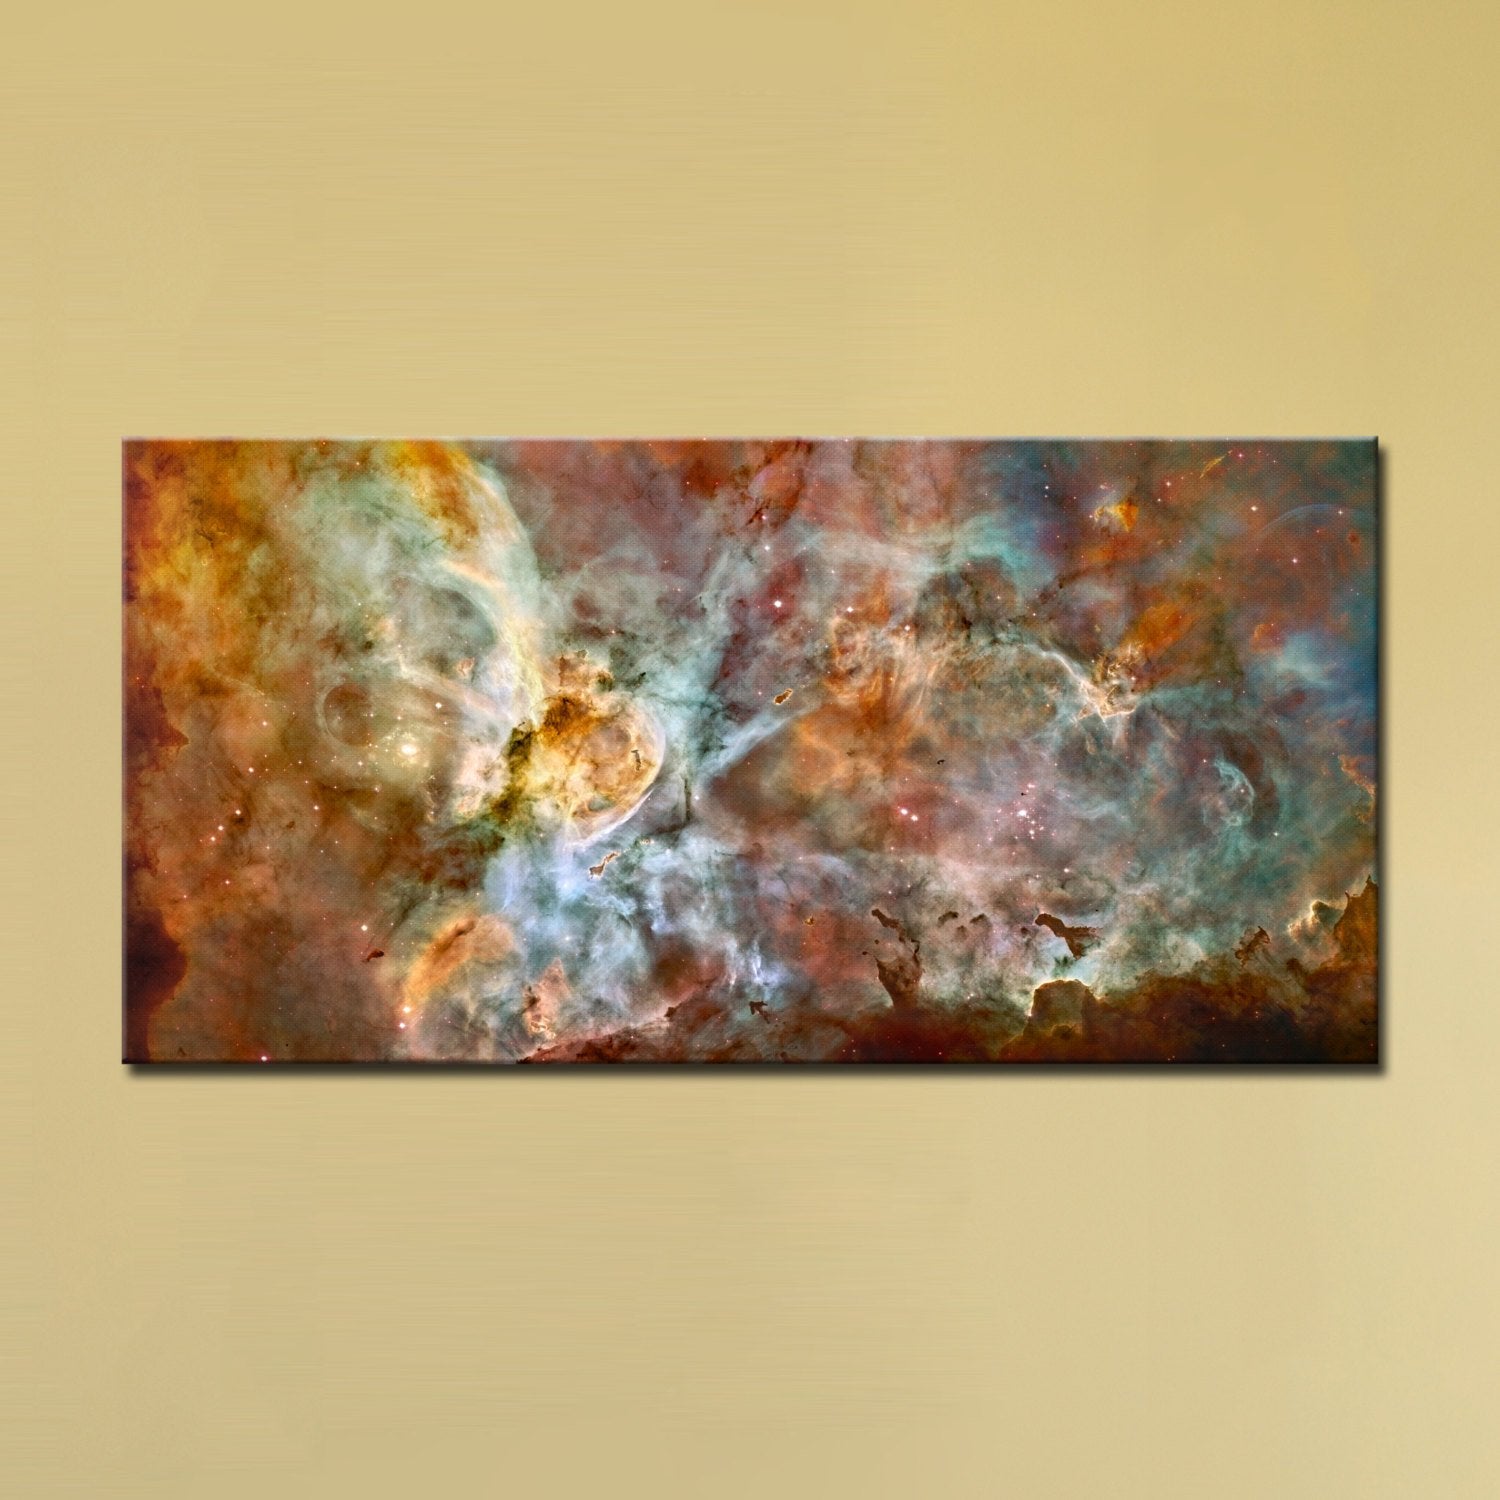 The Carina Nebula, Star Birth in the Extreme (Color) (24" x 36") - Canvas Wrap Print